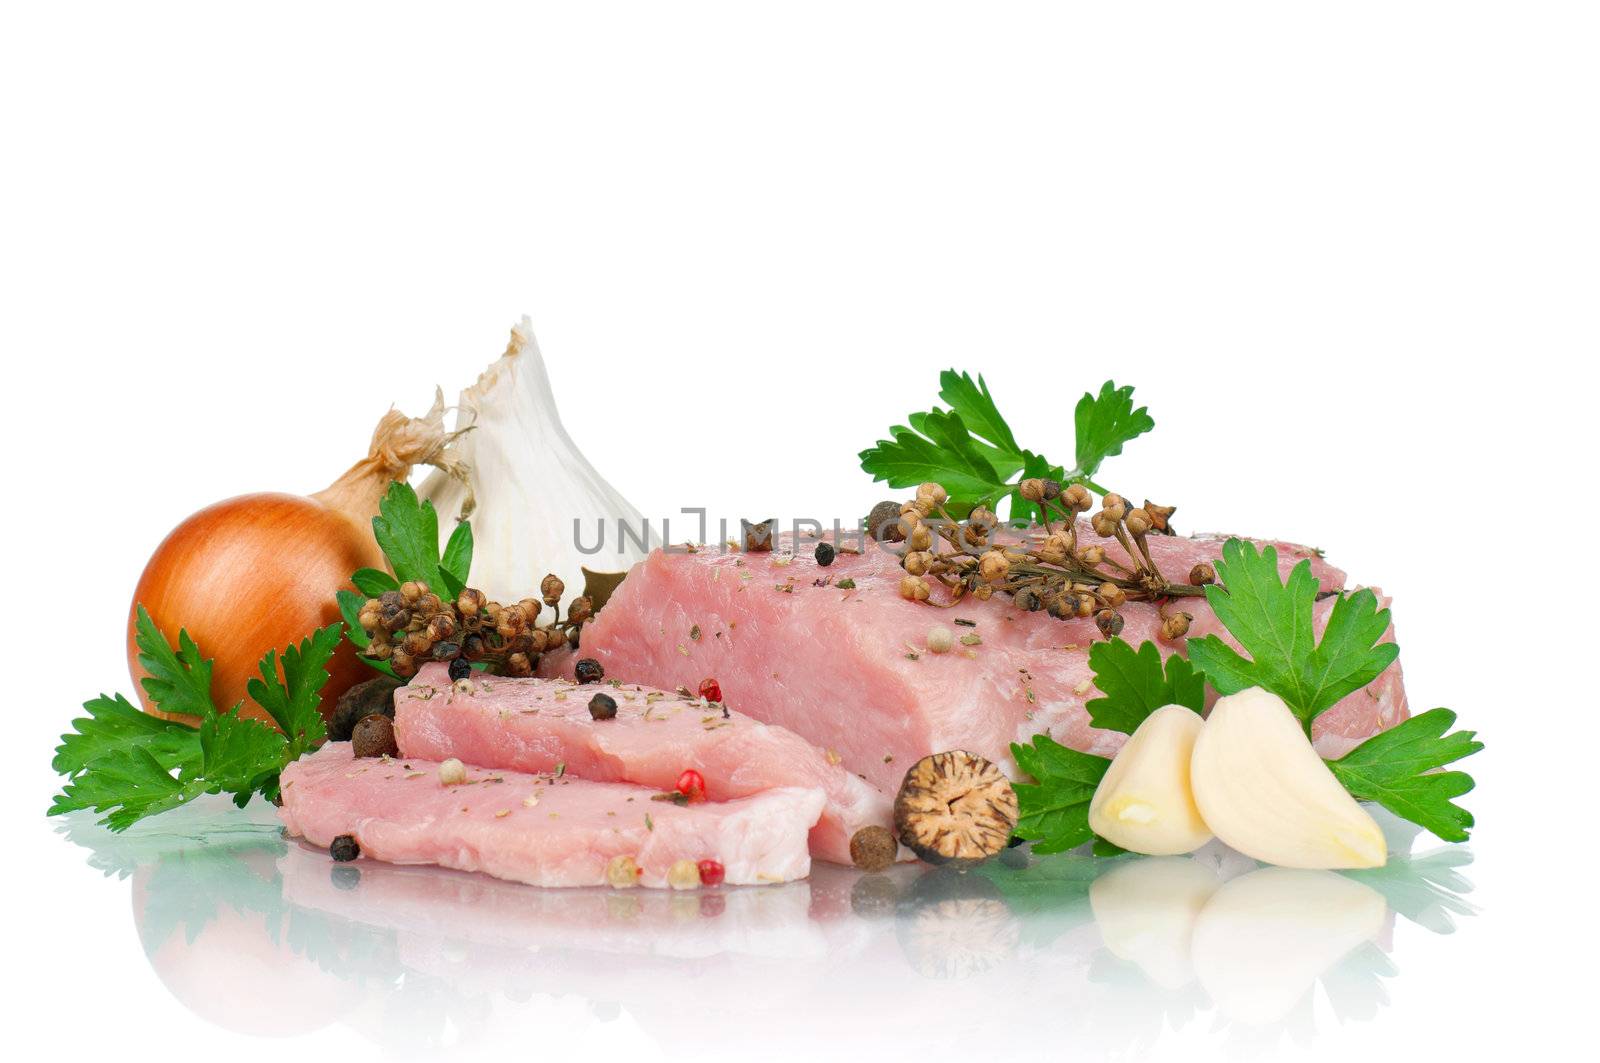 Fresh vegetables and meat on white background